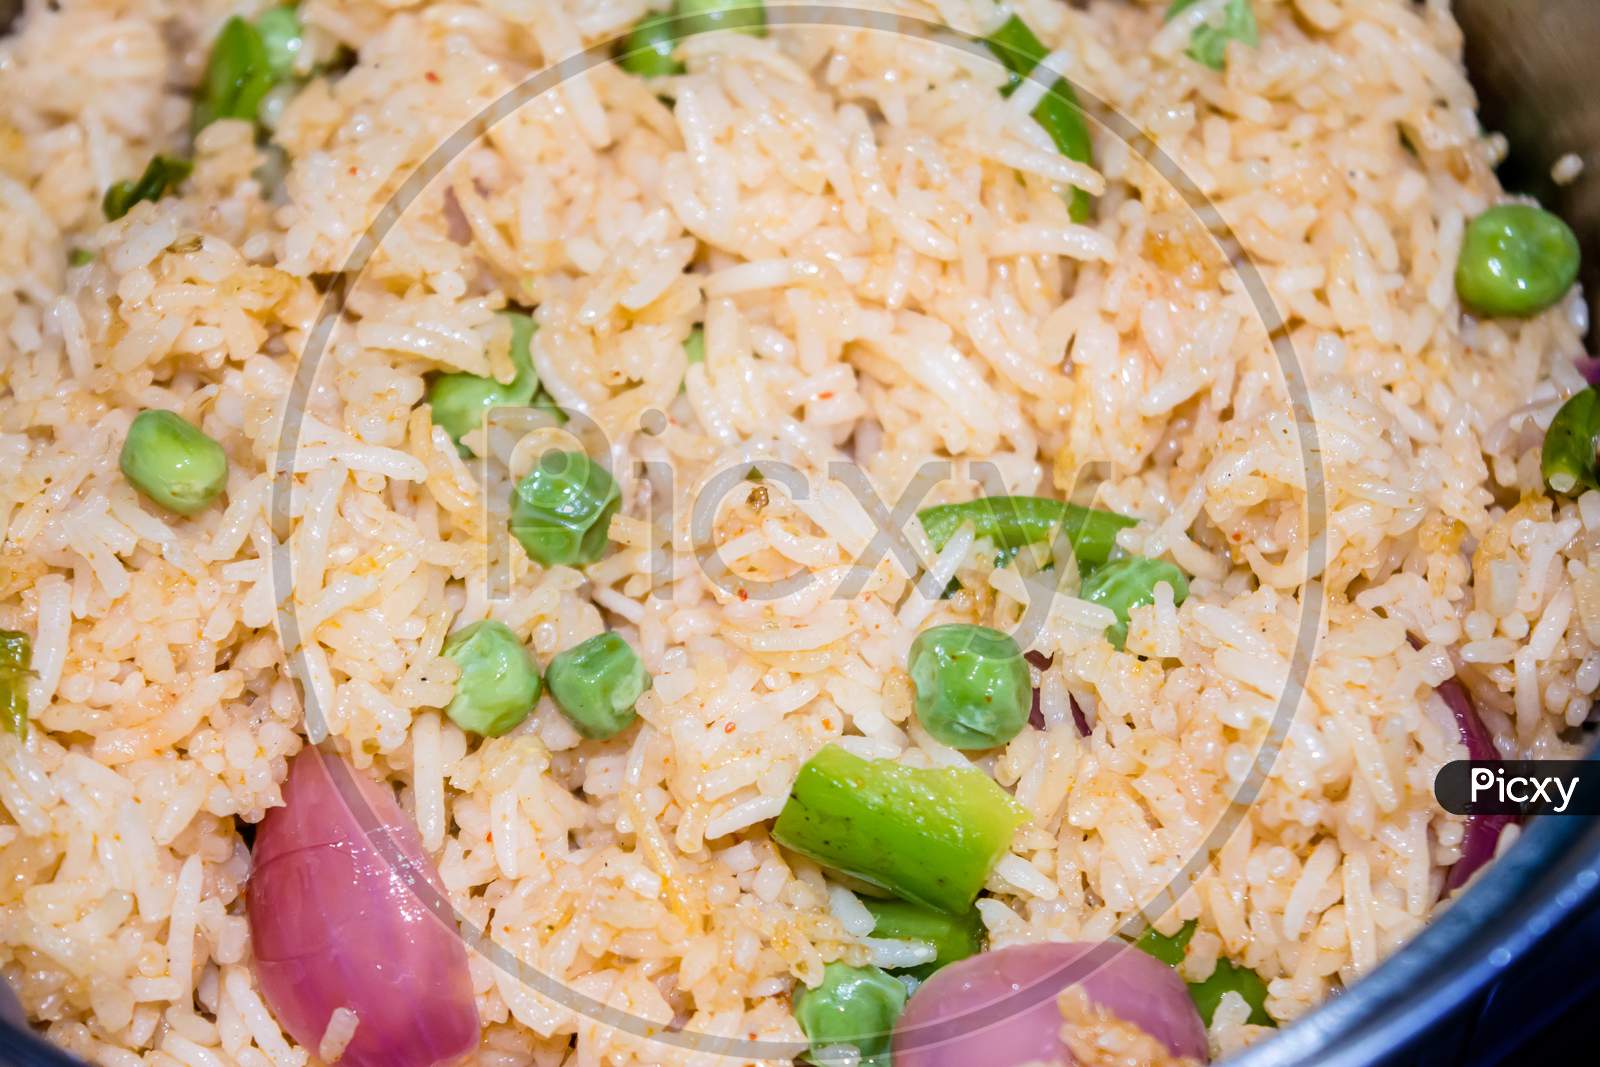 Homemade Chinese fried rice with vegetables, Veg Schezwan Fried Rice, peas, peppers, green beans, carrot. Selective Focus, Top view